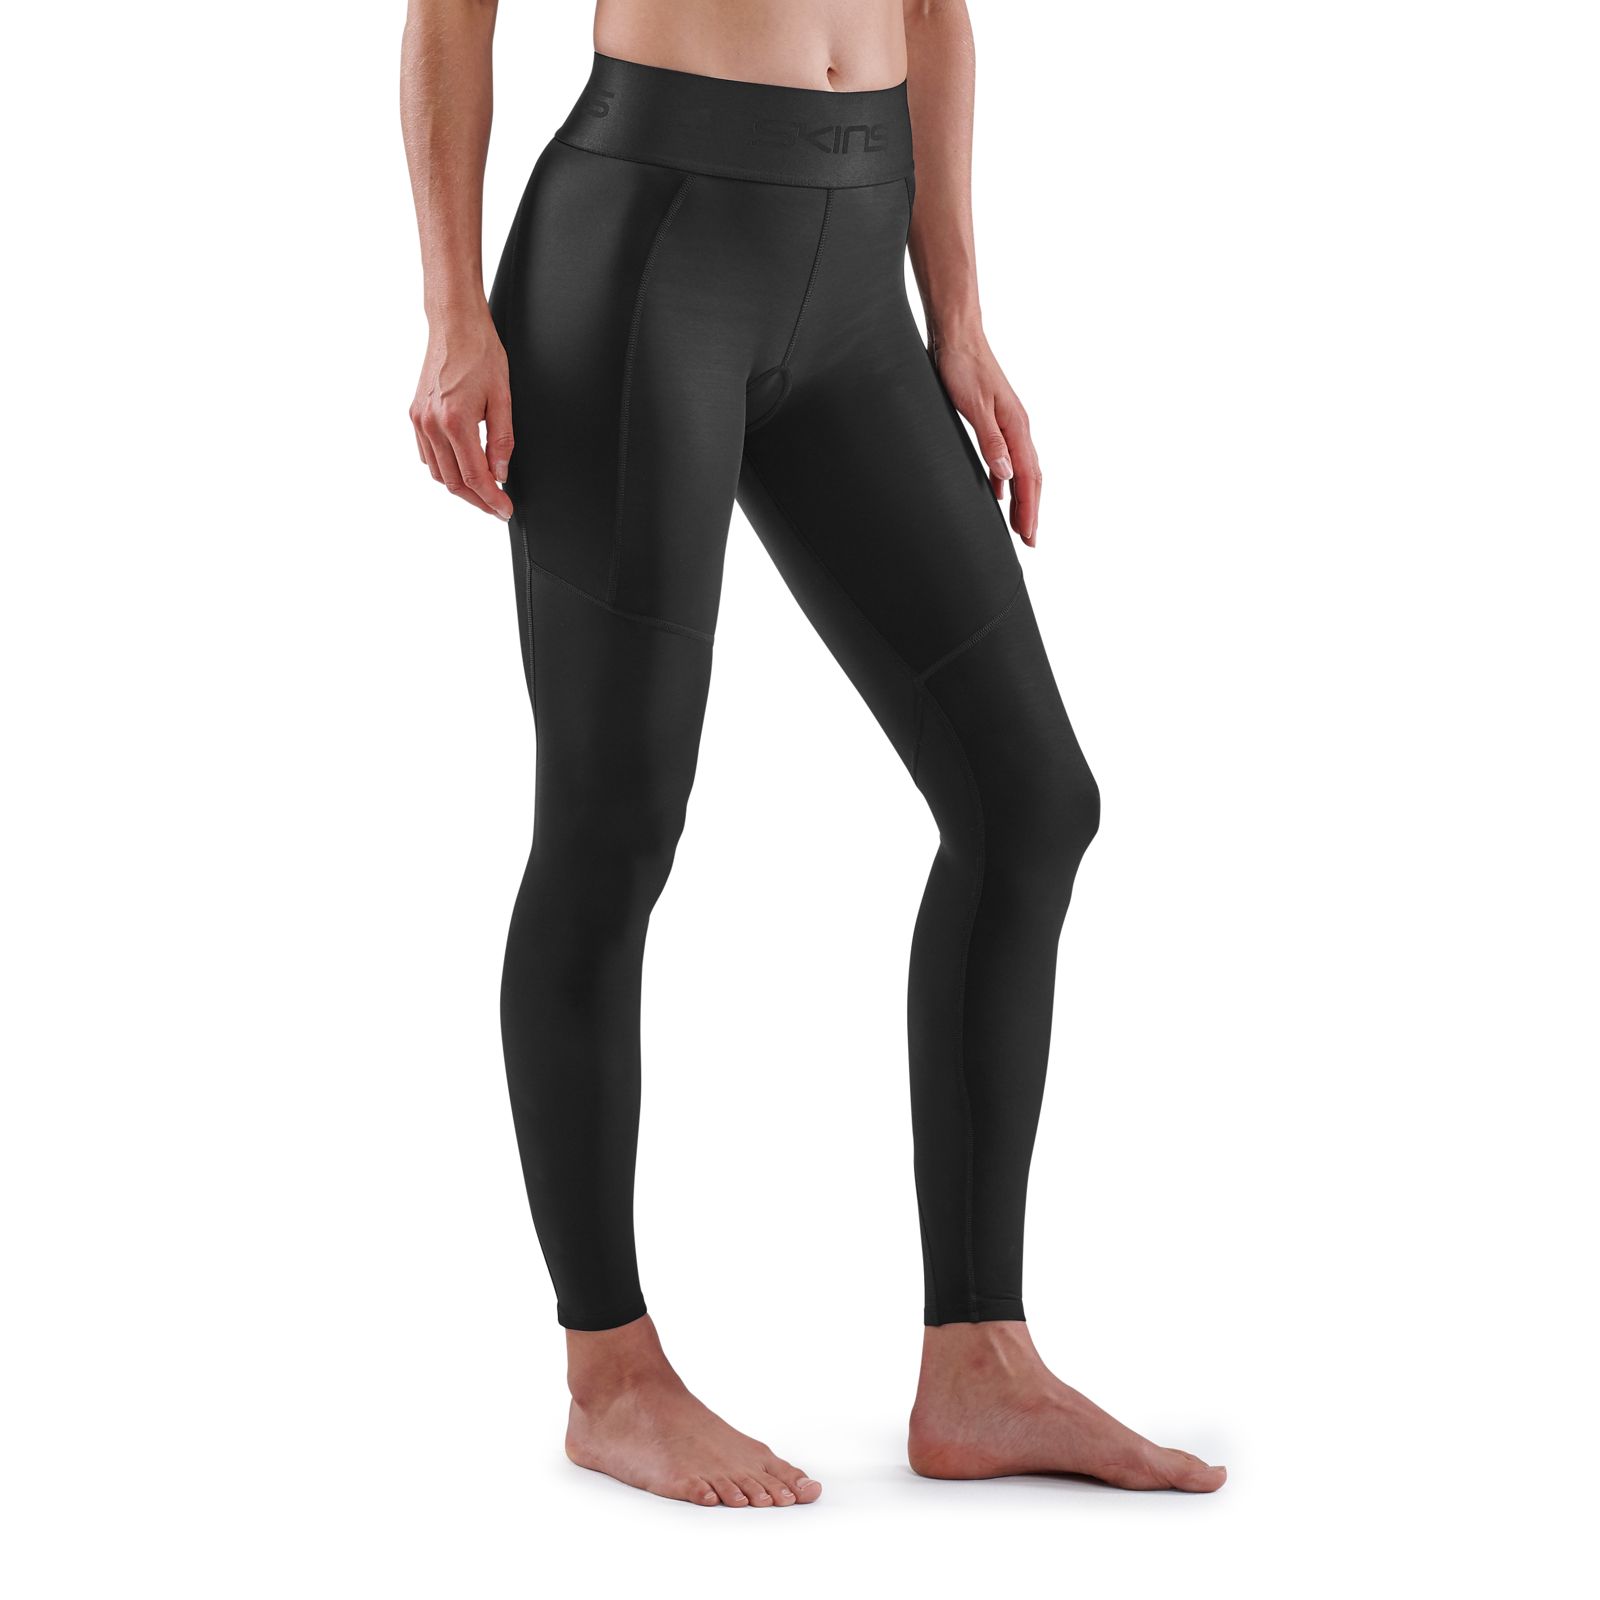 Women's Skins RY400 Compression wear Recovery XS xsmall after